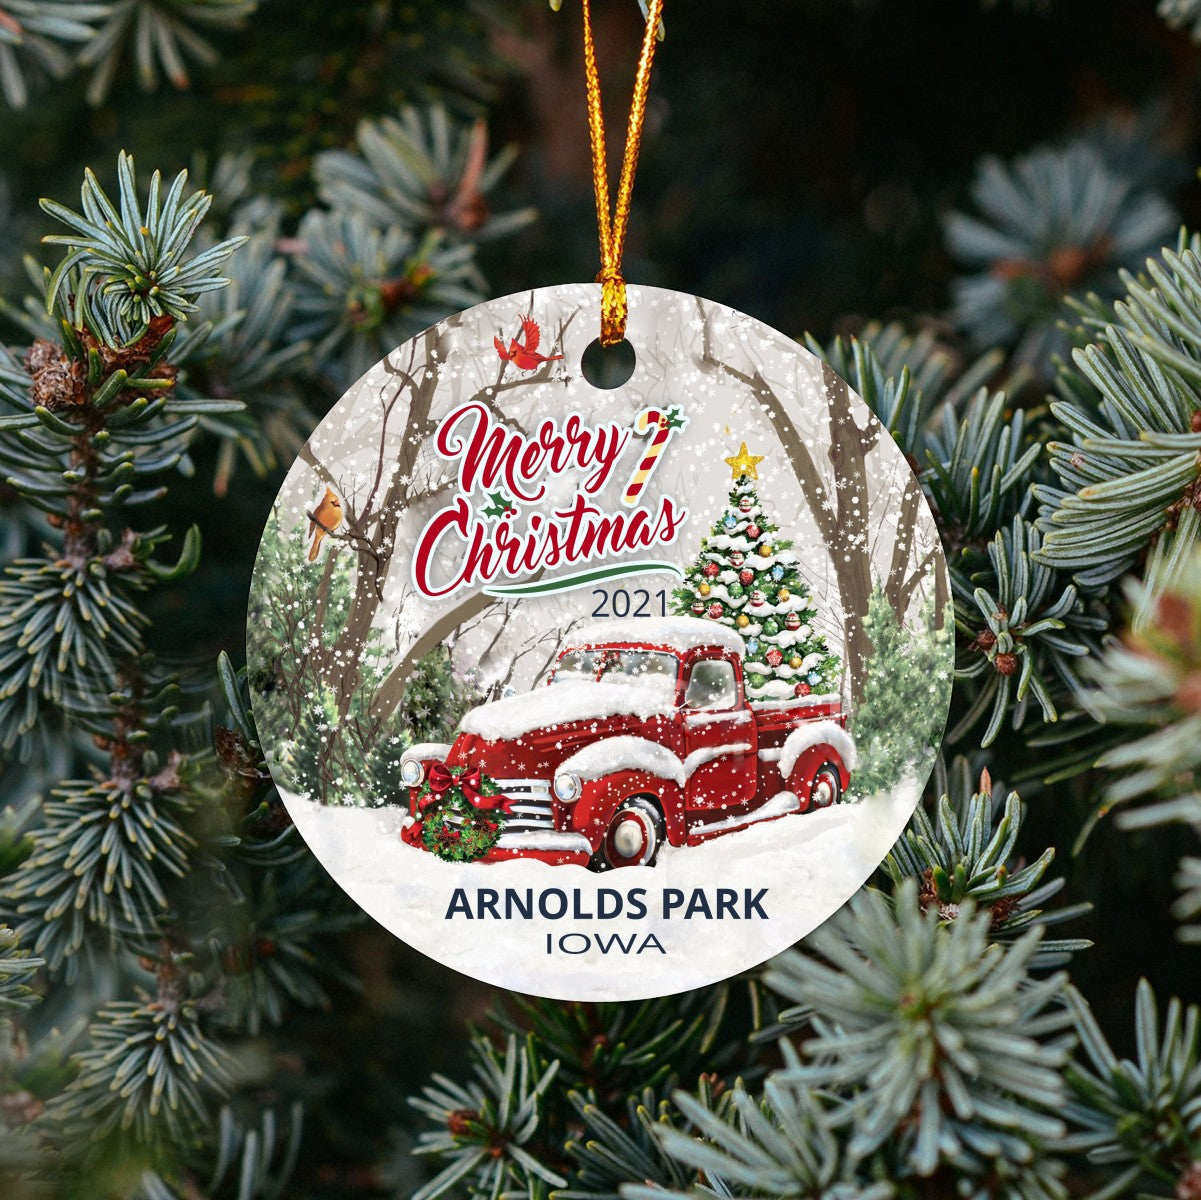 Christmas Tree Ornaments Arnolds Park - Ornament With Name City, State Arnolds Park Iowa IA Ornament - Red Truck Xmas Ornaments 3'' Plastic Gift For Family, Friend And Housewarming